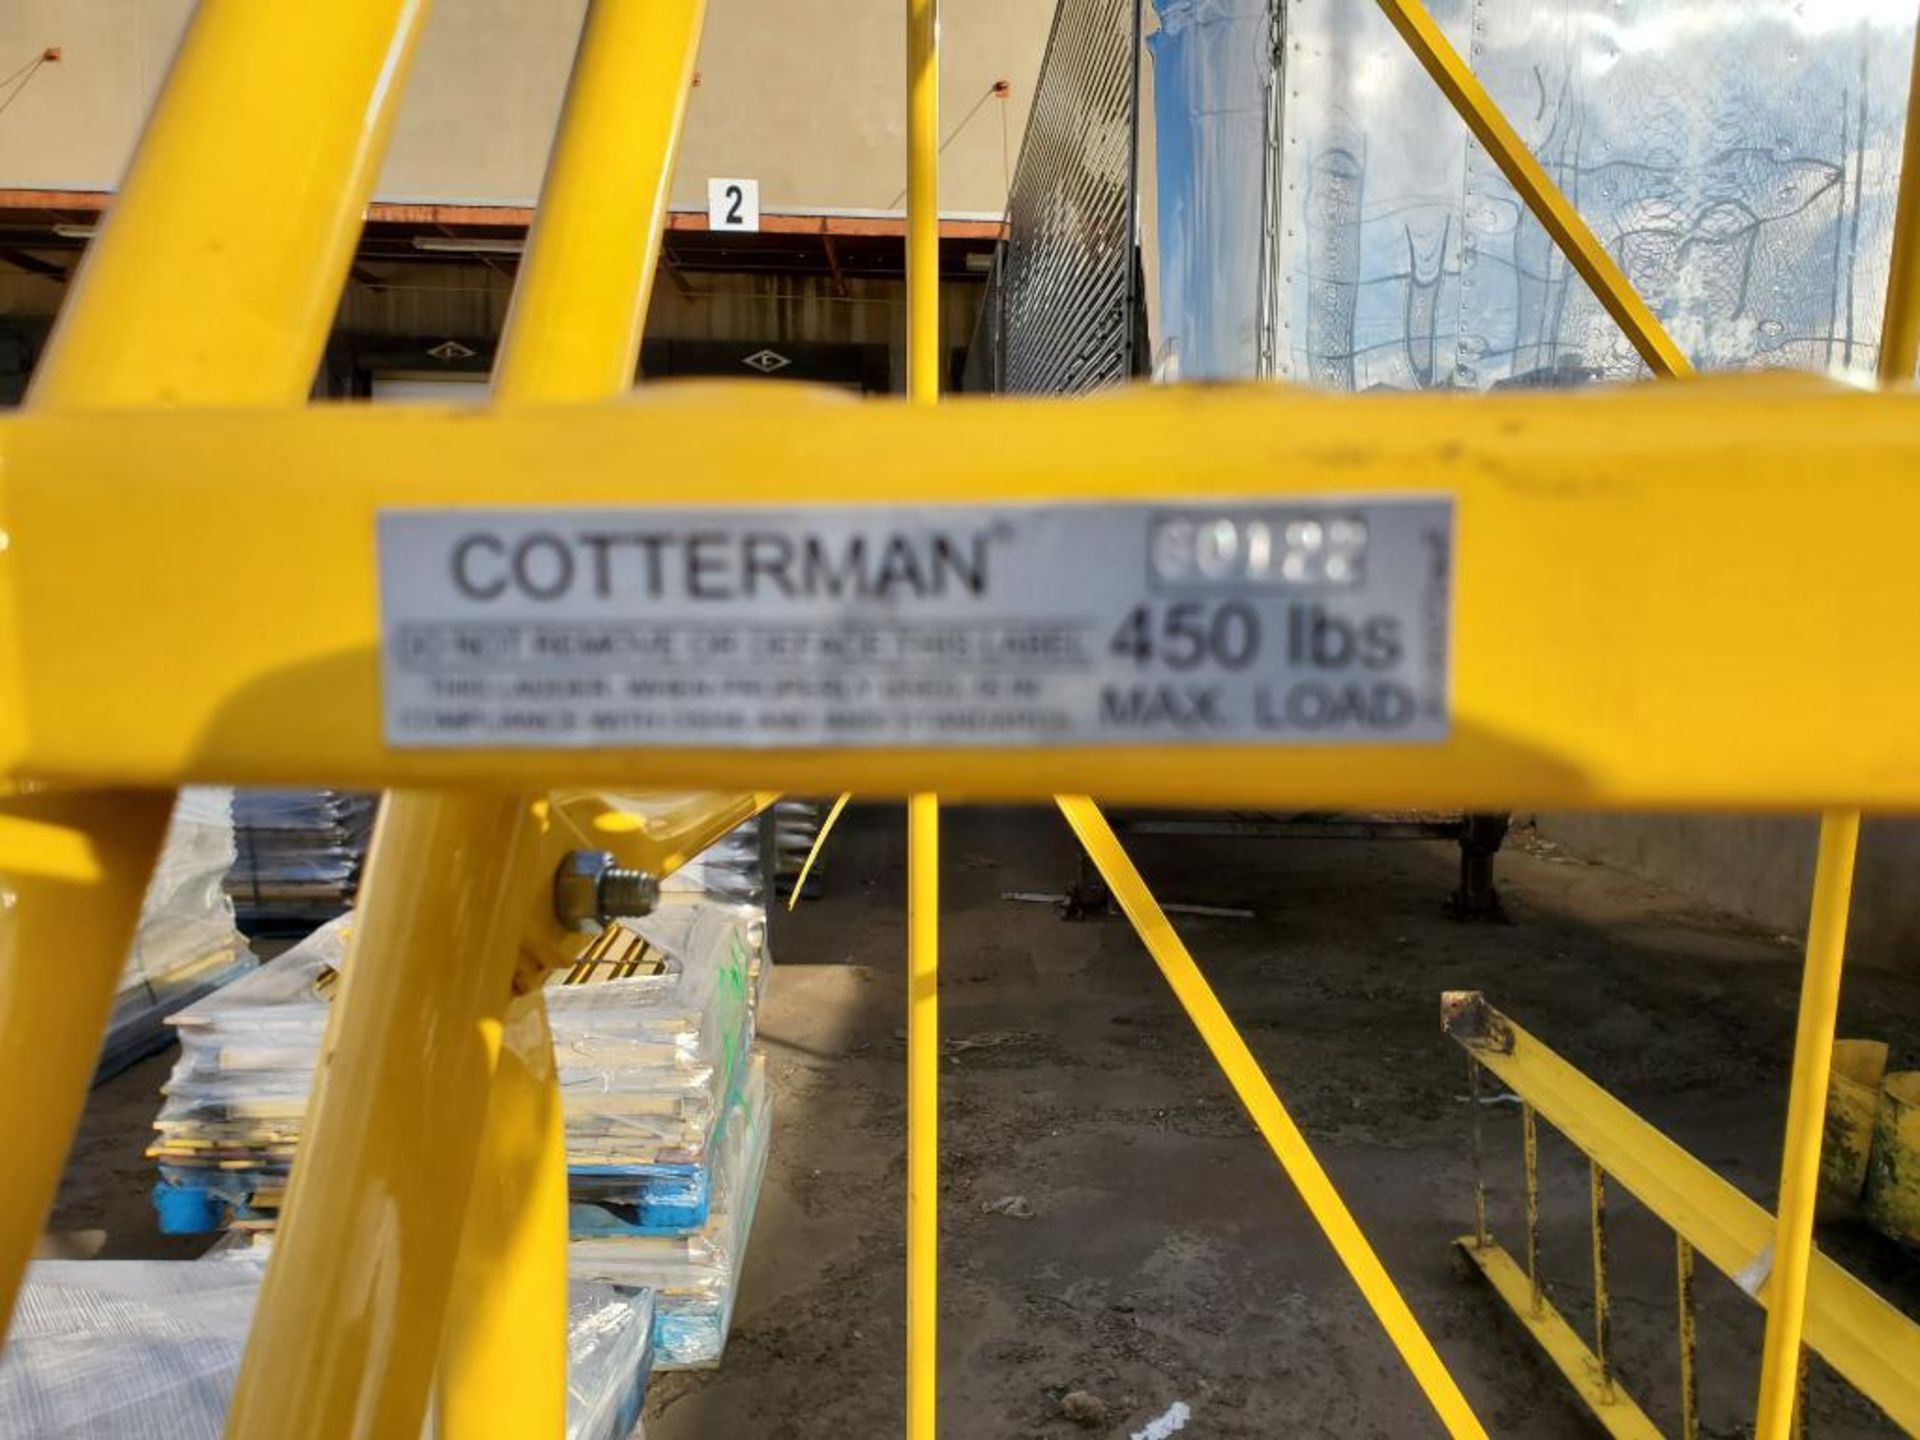 Cotterman Steel Rolling Shop Ladder ($50 Loading Fee Will be Added to Buyers Invoice) - Image 4 of 5